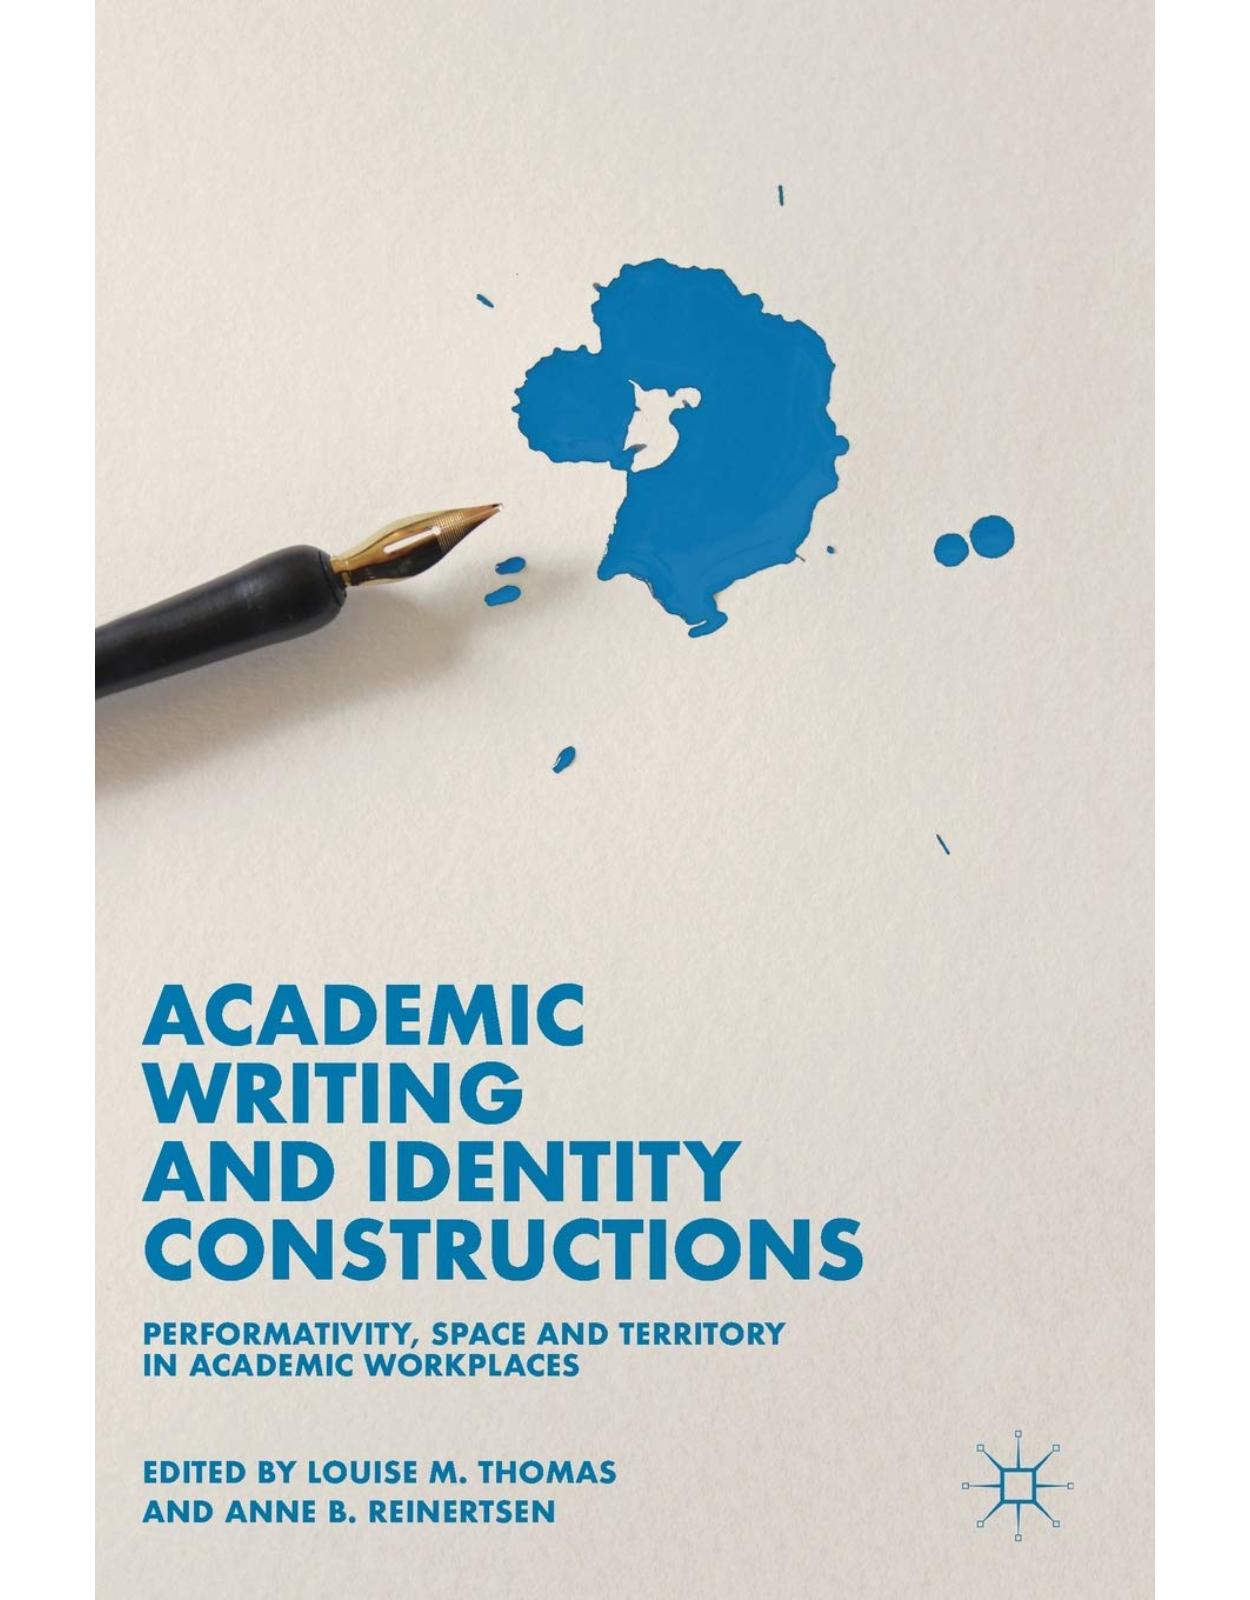 Academic Writing and Identity Constructions. Performativity, Space and Territory in Academic Workplaces